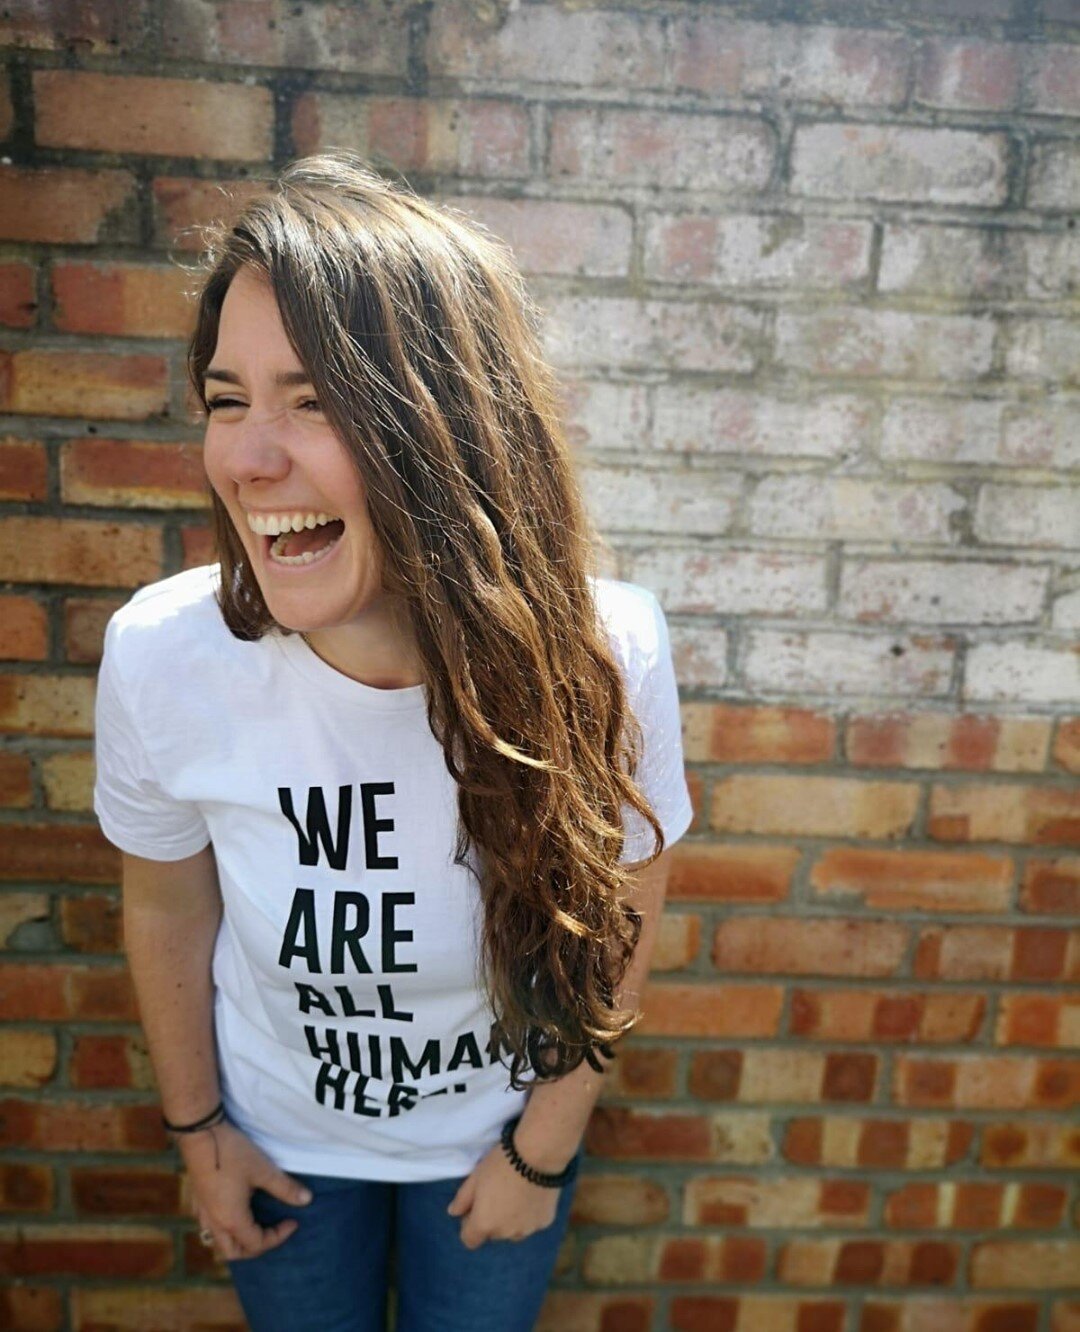 Share a message of positivity this Autumn and feel as awesome as Genevieve here, knowing you&rsquo;re going to look the part in your new &lsquo;We Are All Human Here&rsquo; T. 

Plus, your purchase will go directly towards supporting the vulnerable a